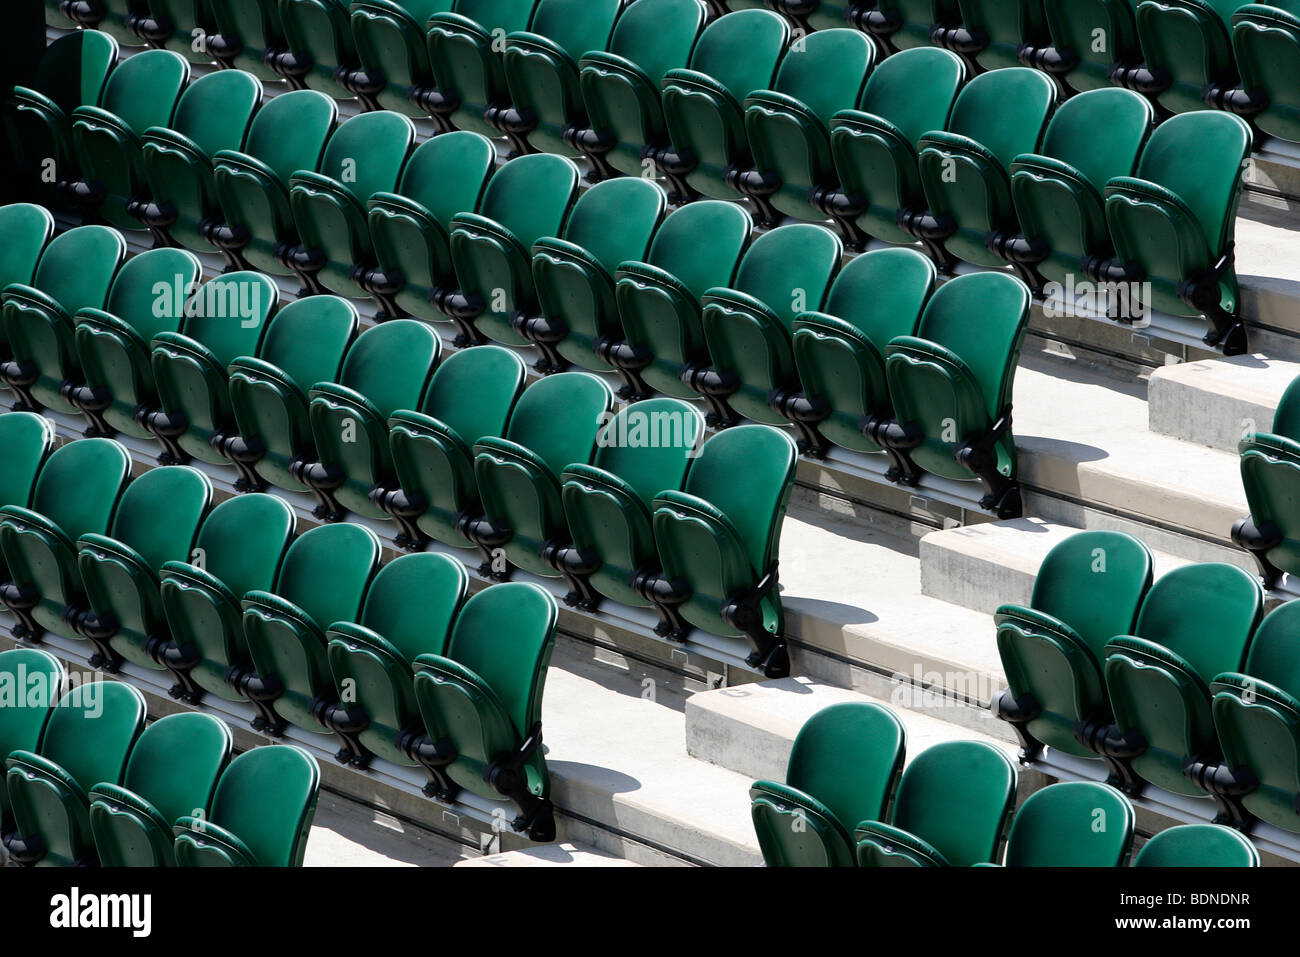 Rows of empty Court 2 seats during the 2009 Wimbledon Tennis Championships Stock Photo